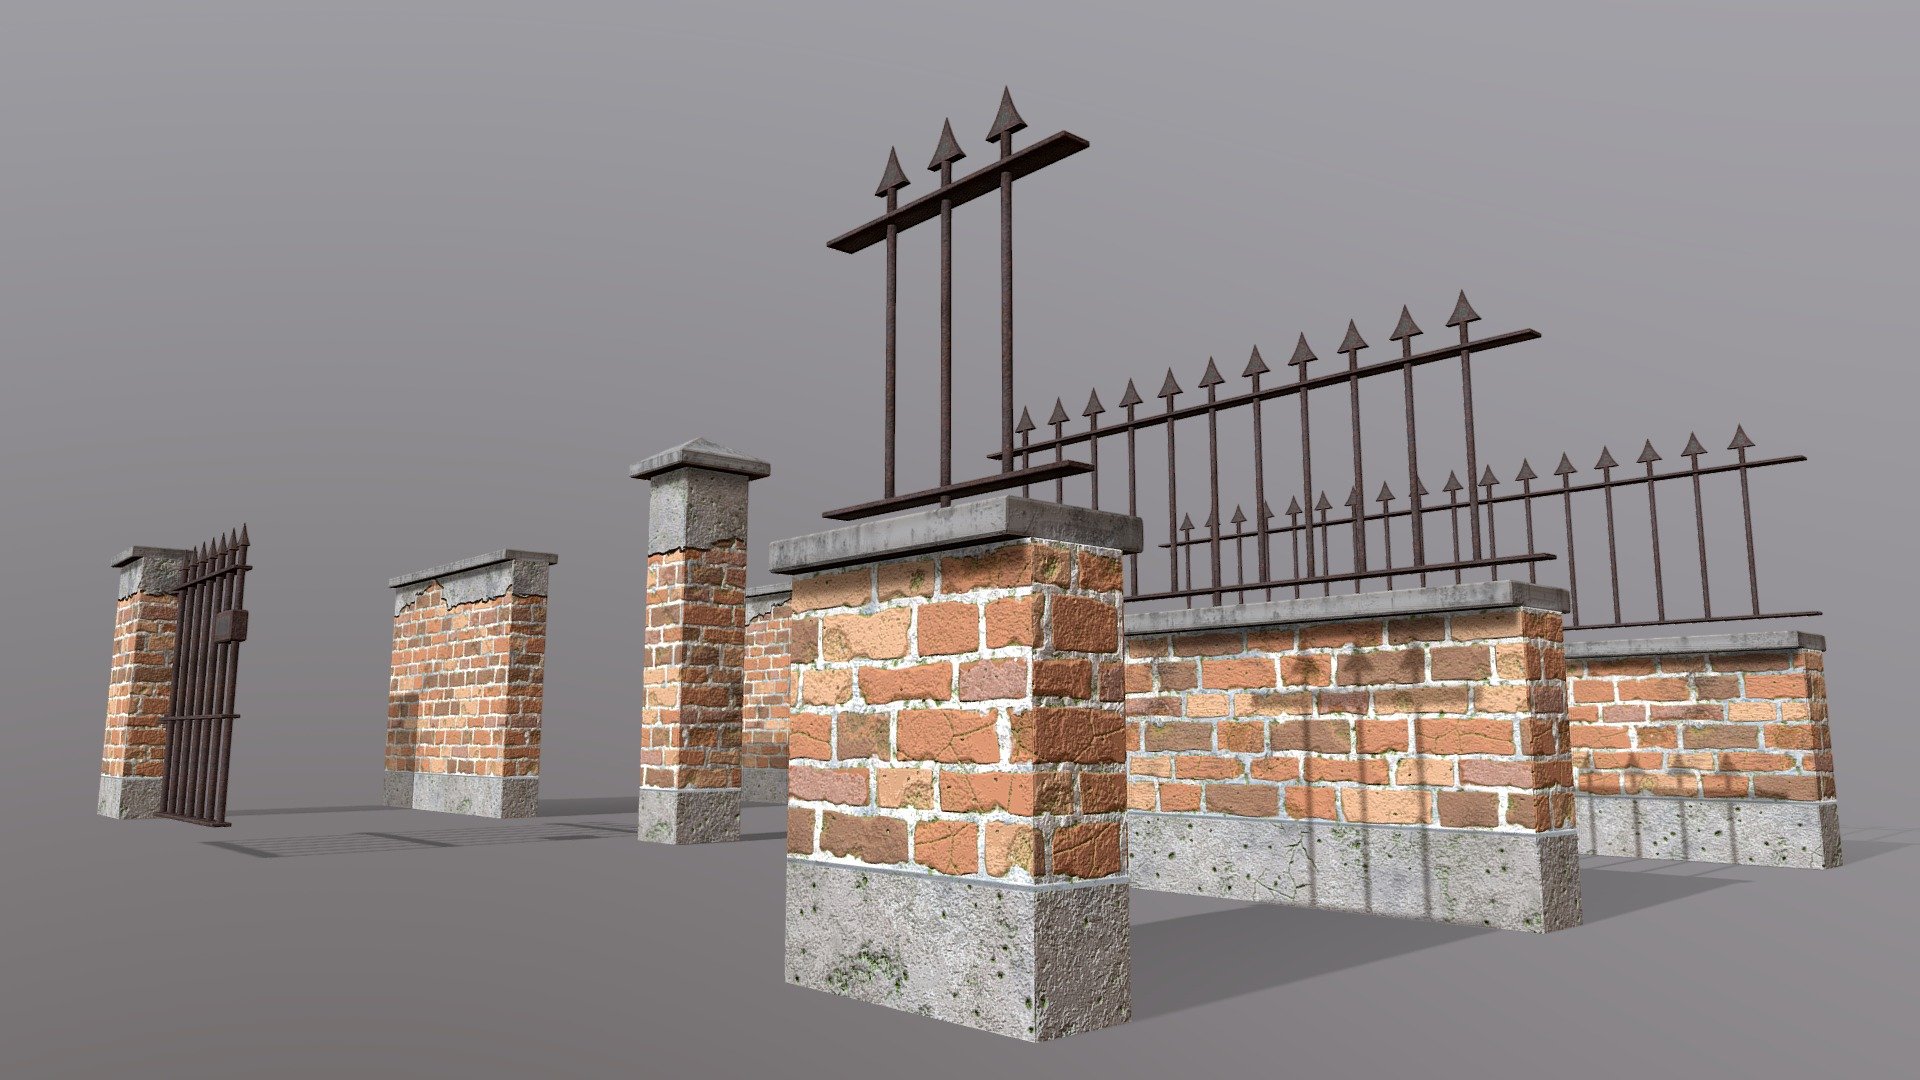 Fully Modular Brick Wall Pack for games and animations. The model is game ready and compatible with game engines. 

It can be used to create a garden wall, fence or a boundary wall for realistic games.

TWO variations of the wall are included.

The package contains 4K (4096x4096) PBR textures which are highly detailed HD.

Specific PBR maps for the following  game engines are included in separate files:




Unity

Unreal

PBR - Metal Rough

The package contains 8 Individual modular pieces that can be arranged in any desired formation.

Pieces included:




3 sizes of wall with wrought iron fence.

3 sizes of taller wall

1 pillar.

1 small metal gate.

Total polycount - 2,215 polygons - 2,568 Vertices (Low-Poly)

The 3d model is properly UV mapped with non-overlapping and optimised UV's for a better texel density.  

Create and build your own PC &amp; mobile environments using our PBR Modular Fence Pack 3d model